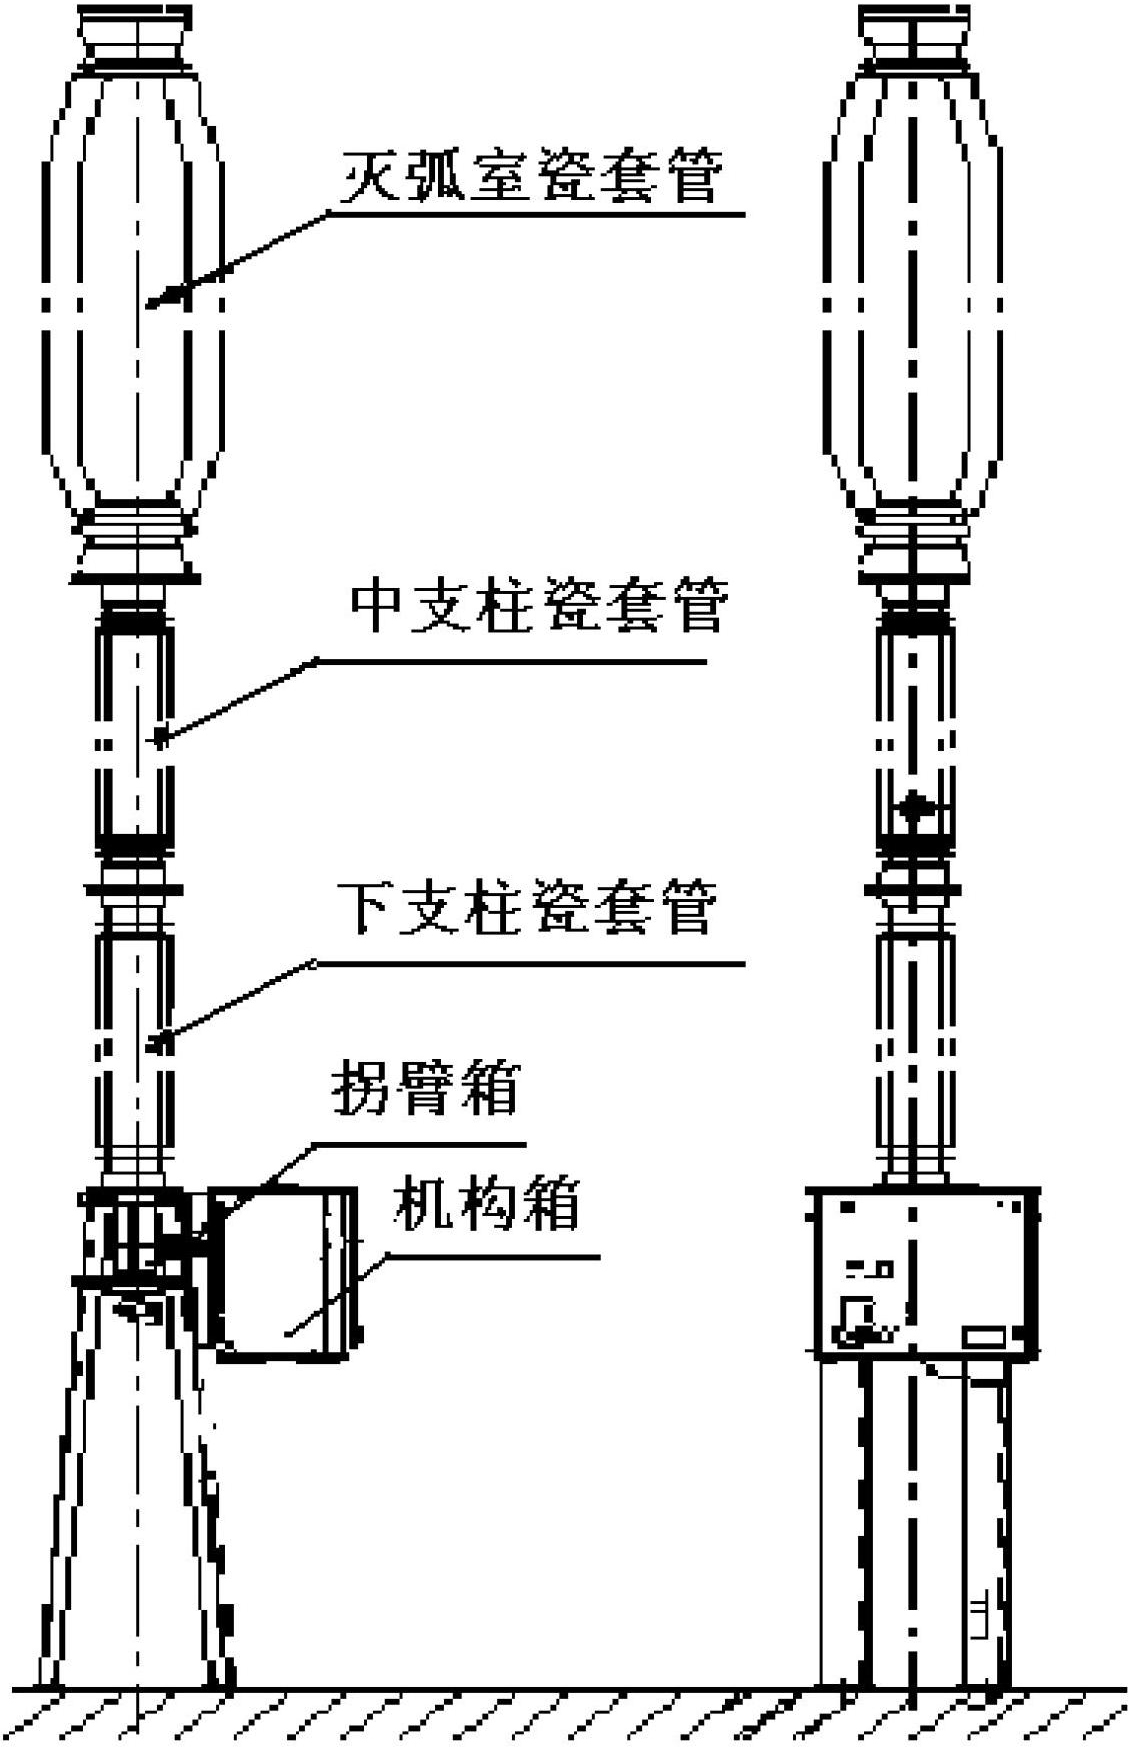 Three-grade seismic fortification method for electrical equipment